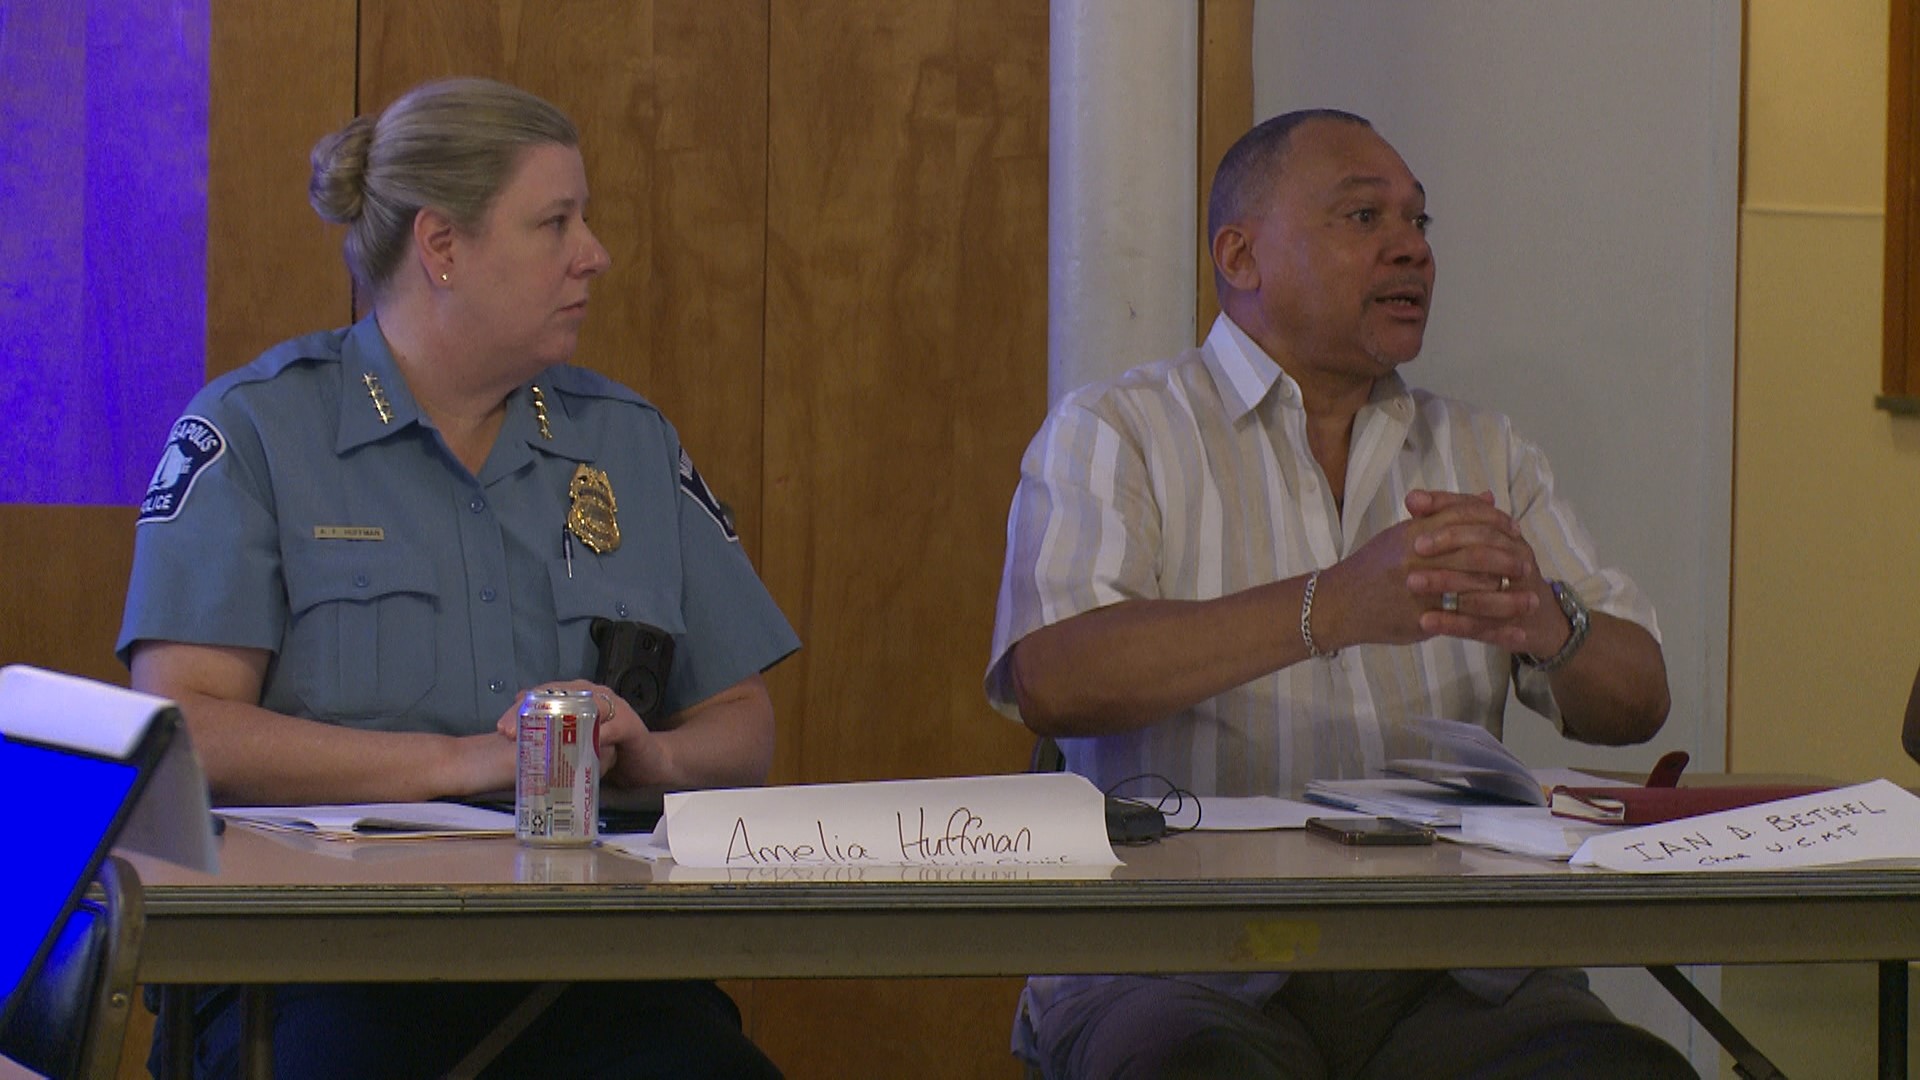 The Police Community Relations Council met Thursday for the first time and focused their discussion on MPD recruitment.